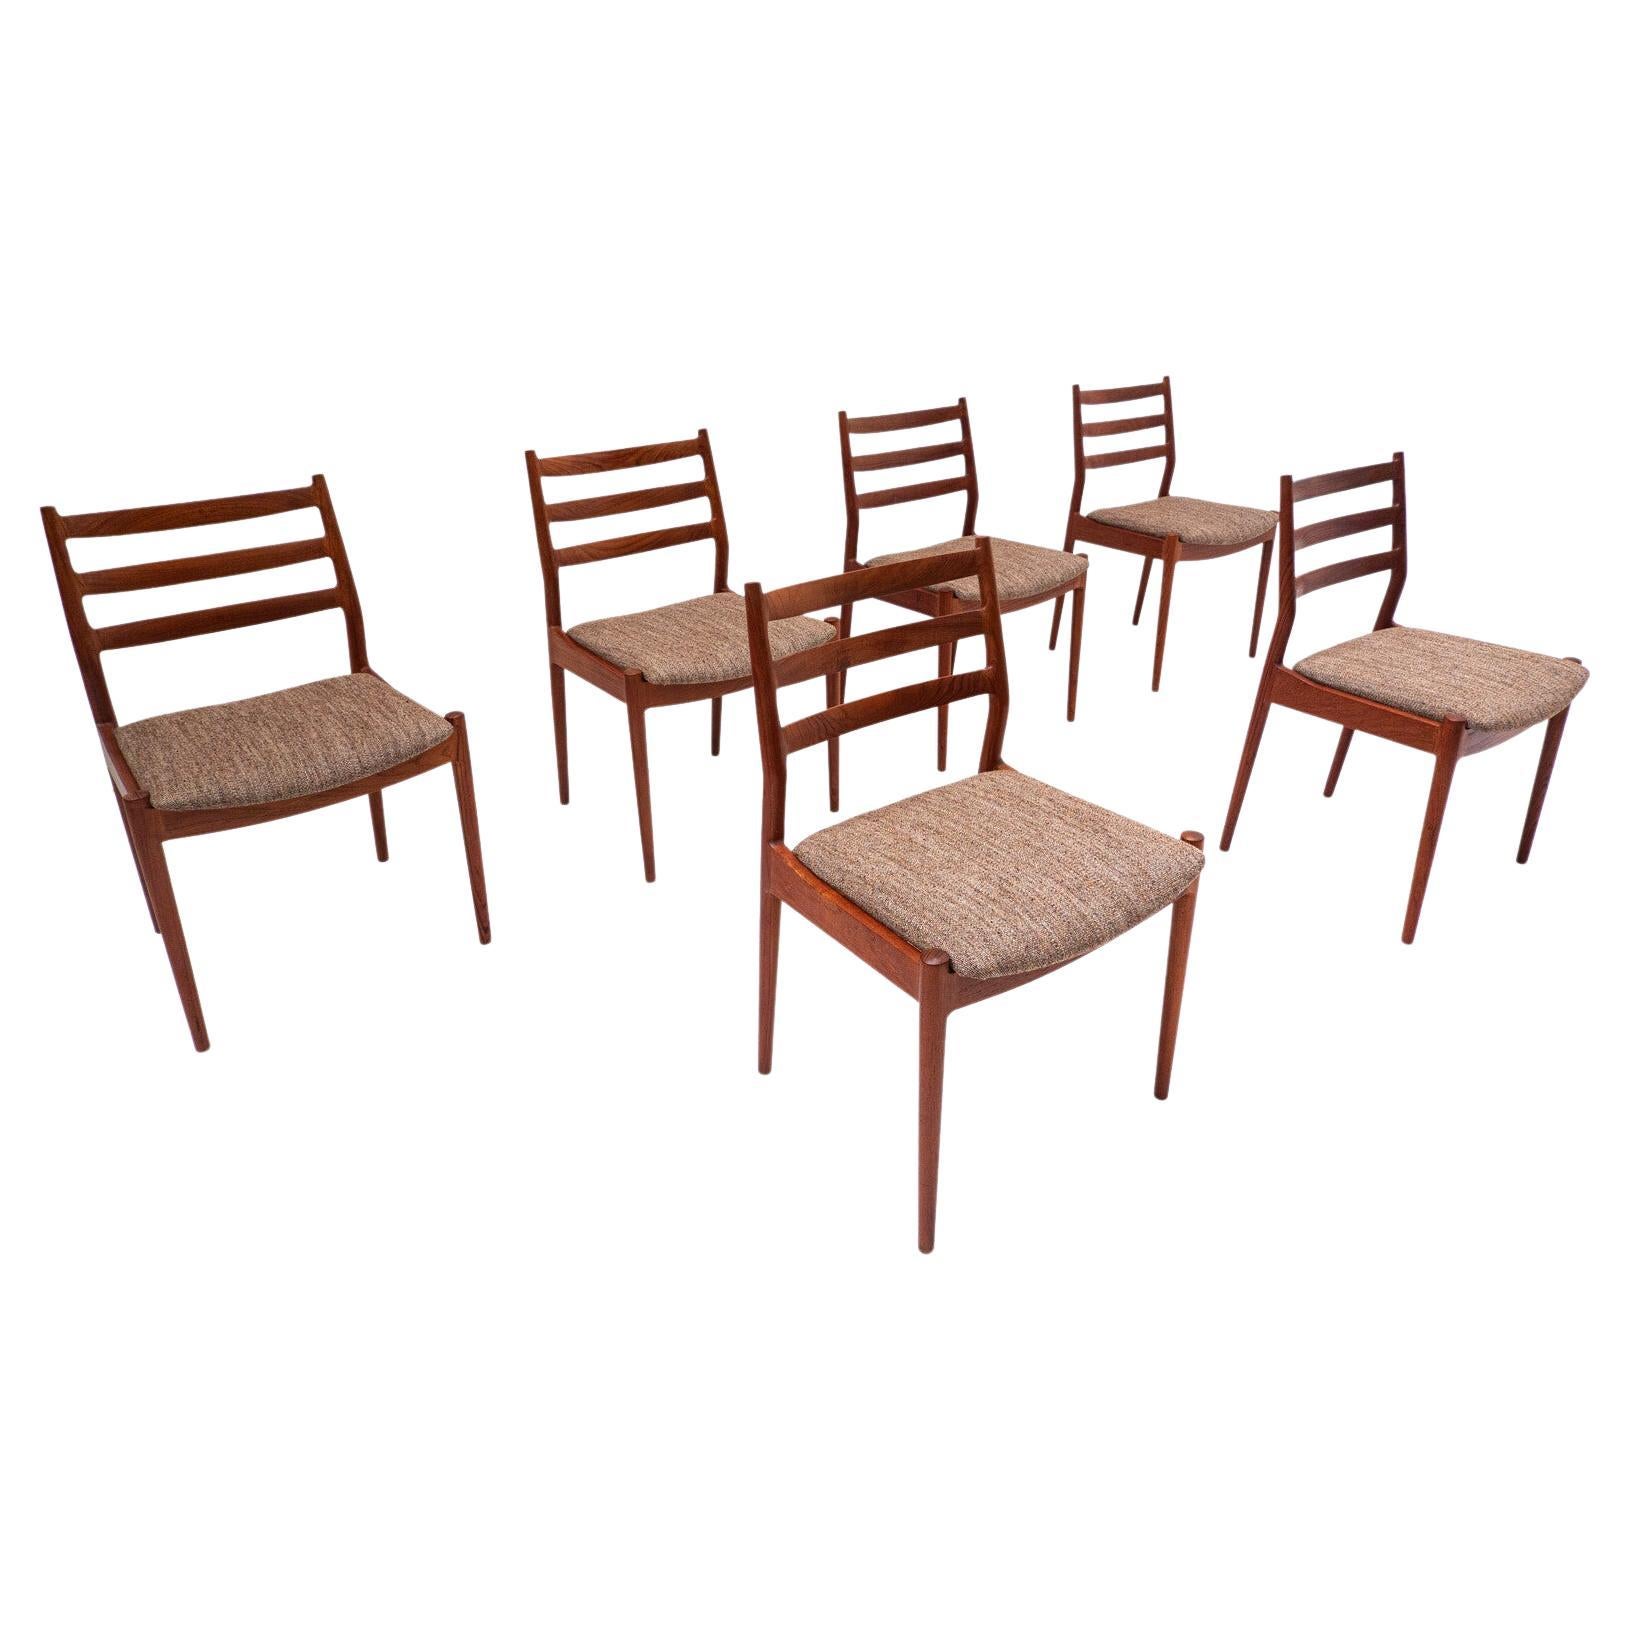 Set of 6 Mid-Century Scandinavian Wooden Chairs, 1960s For Sale